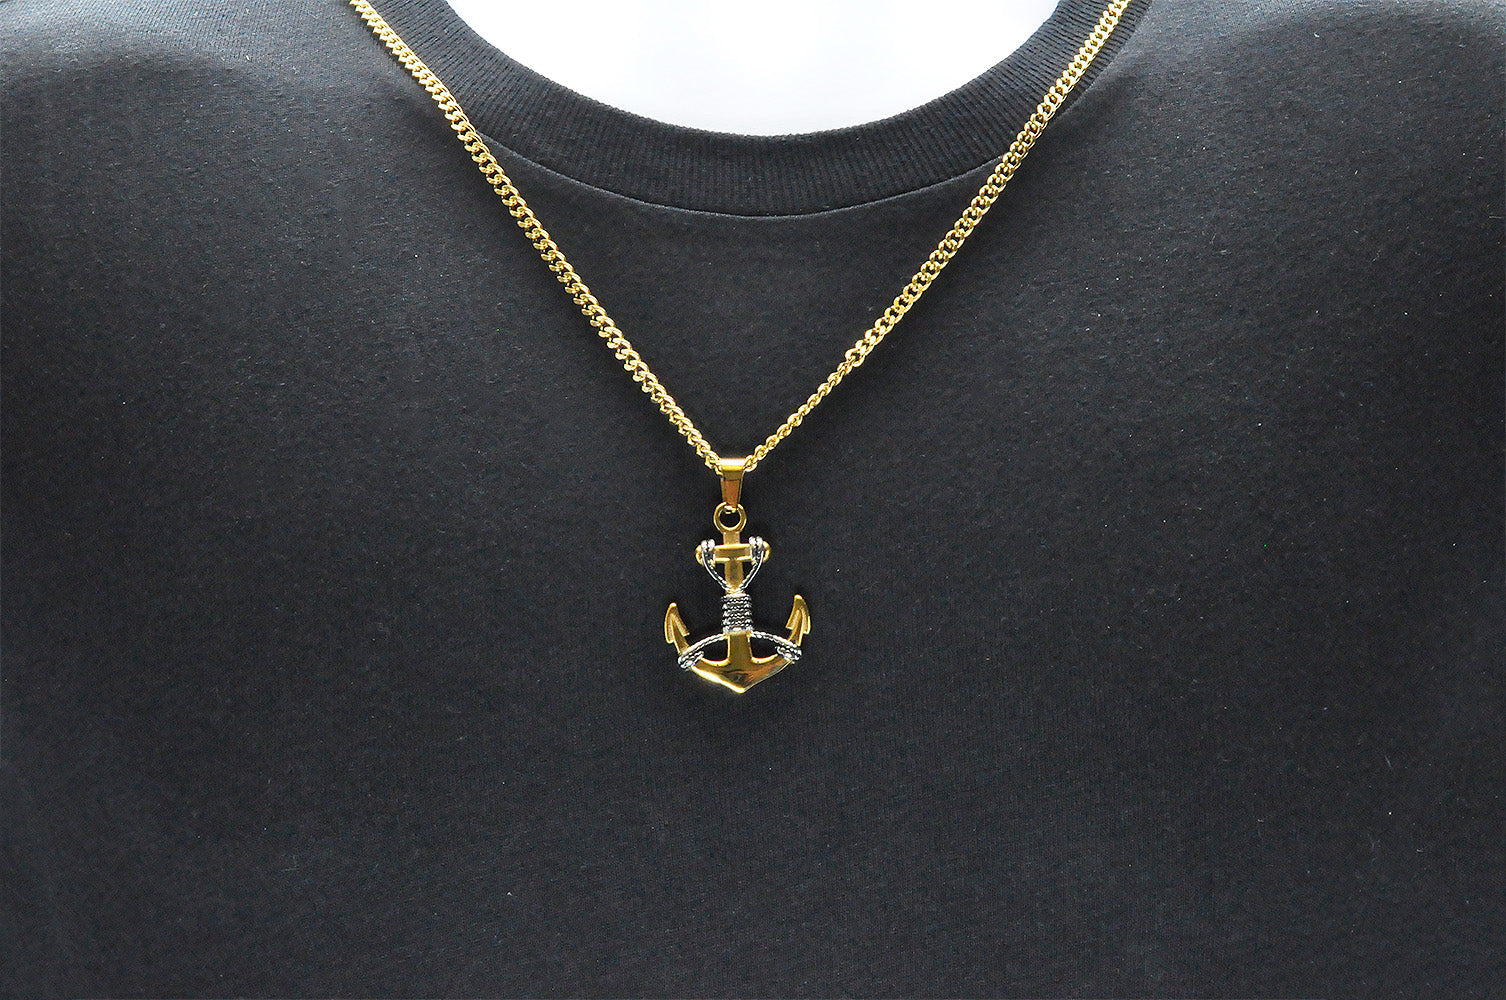 The Anchor Necklace | Anchor necklace, Anchor pendant gold, Anchor jewelry